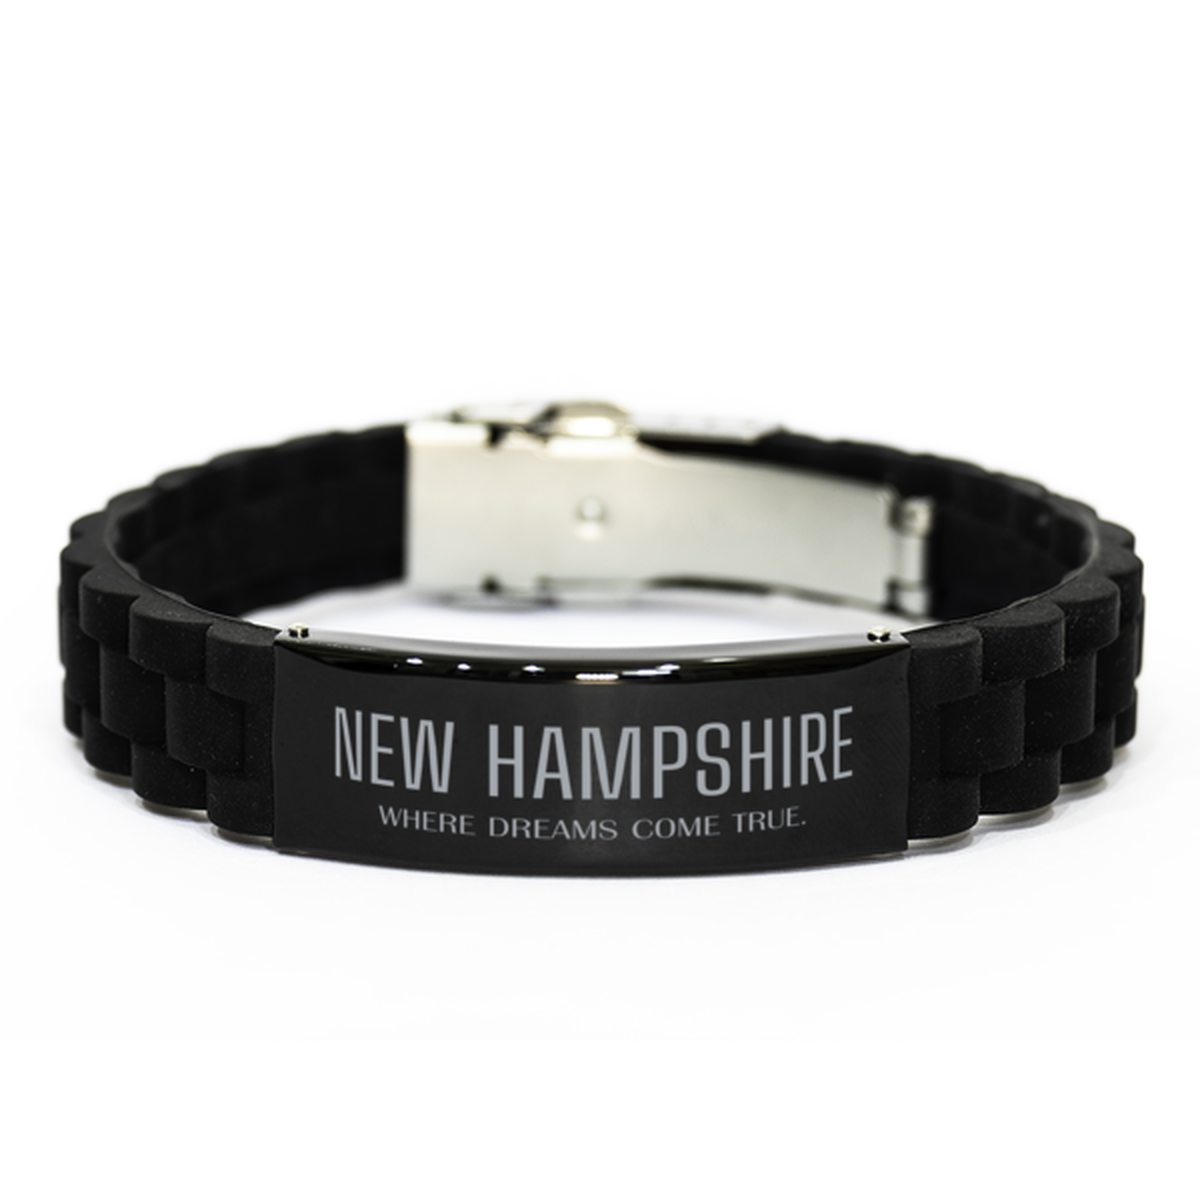 Love New Hampshire State Black Glidelock Clasp Bracelet, New Hampshire Where dreams come true, Birthday Inspirational Gifts For New Hampshire Men, Women, Friends